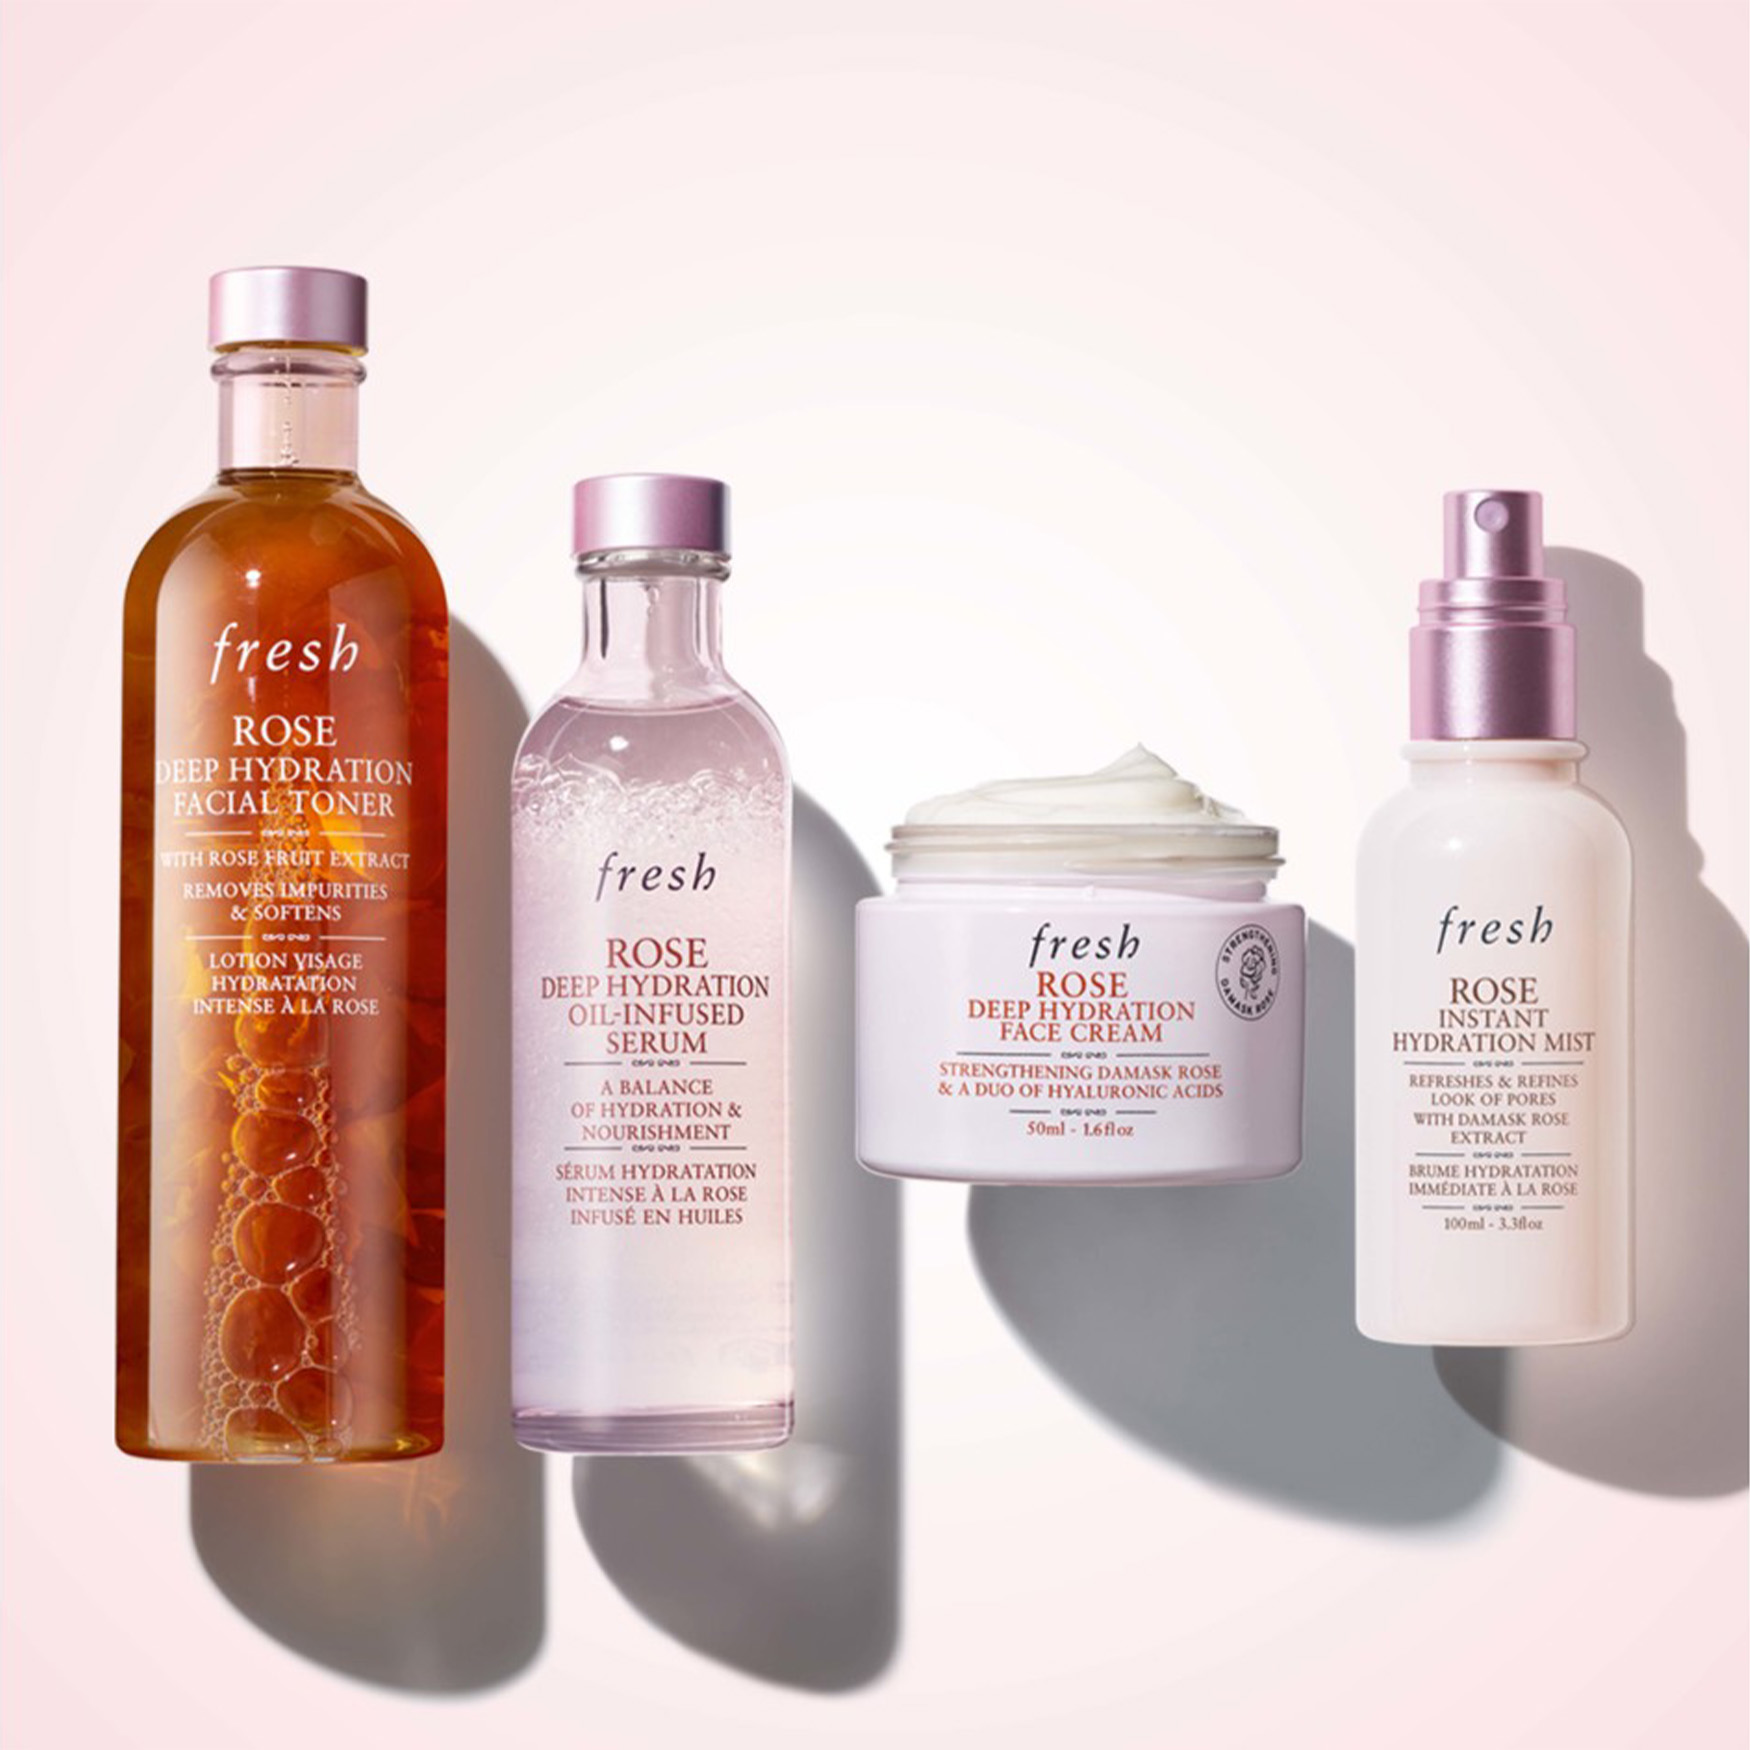 Fresh Rose Instant Hydration Mist | Space NK